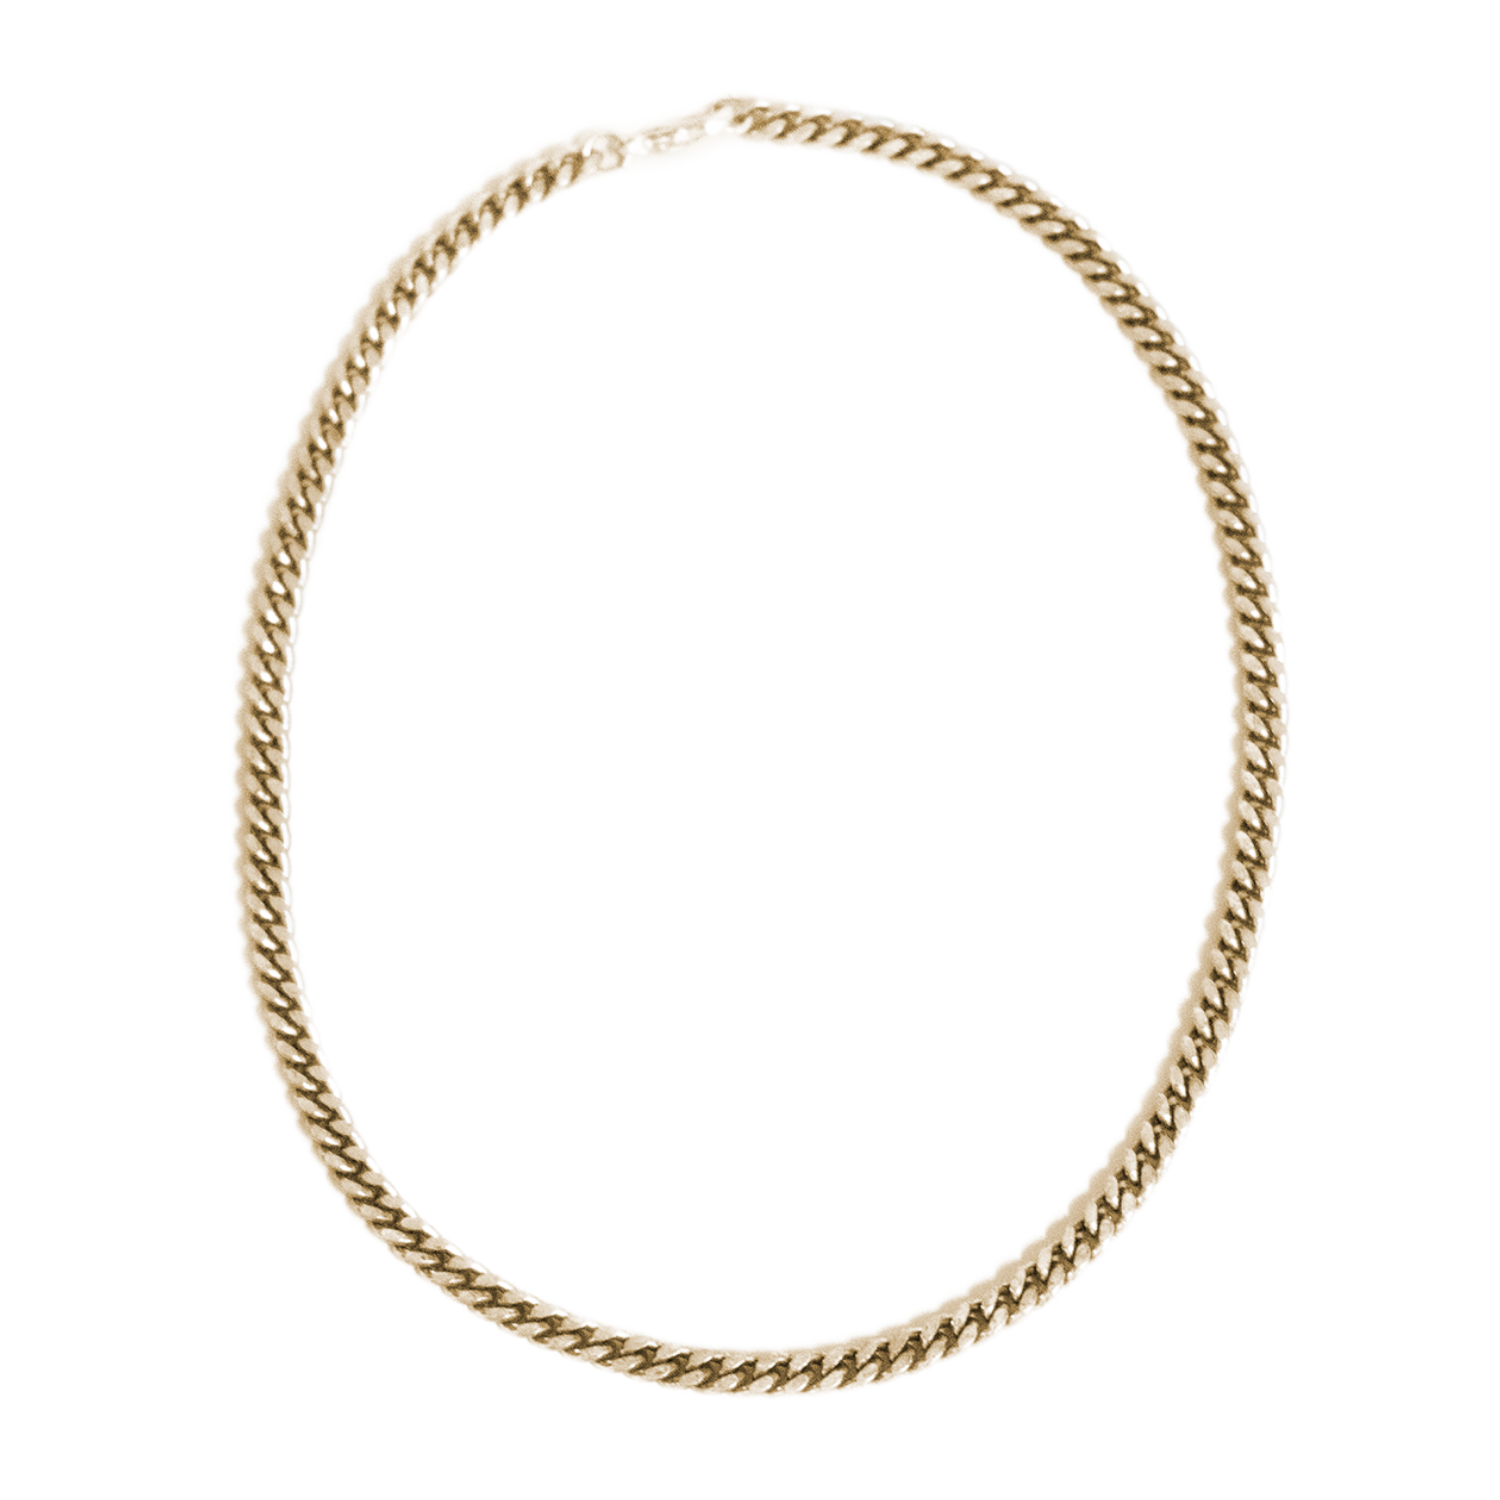 Skinny Cable Chain Necklace